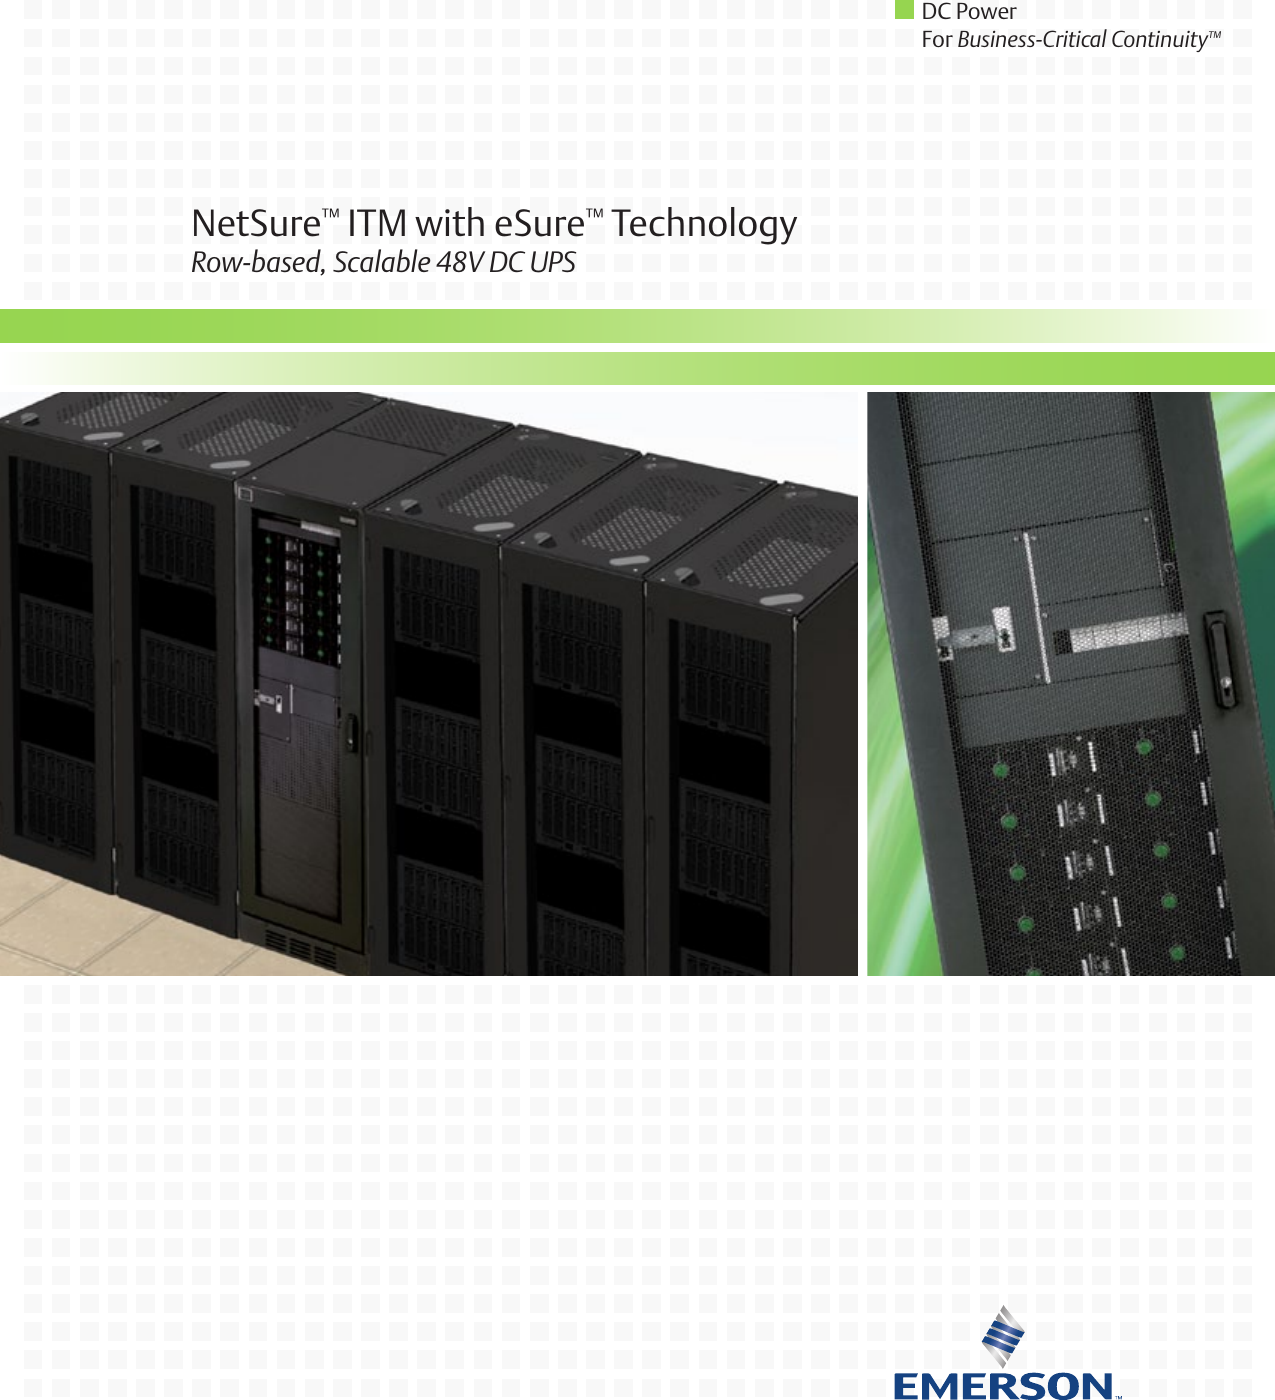 Page 1 of 12 - Emerson Emerson-Netsure-Itm-48-Vdc-Ups-70-Kw-To-280-Kw-Brochure-  Emerson-netsure-itm-48-vdc-ups-70-kw-to-280-kw-brochure